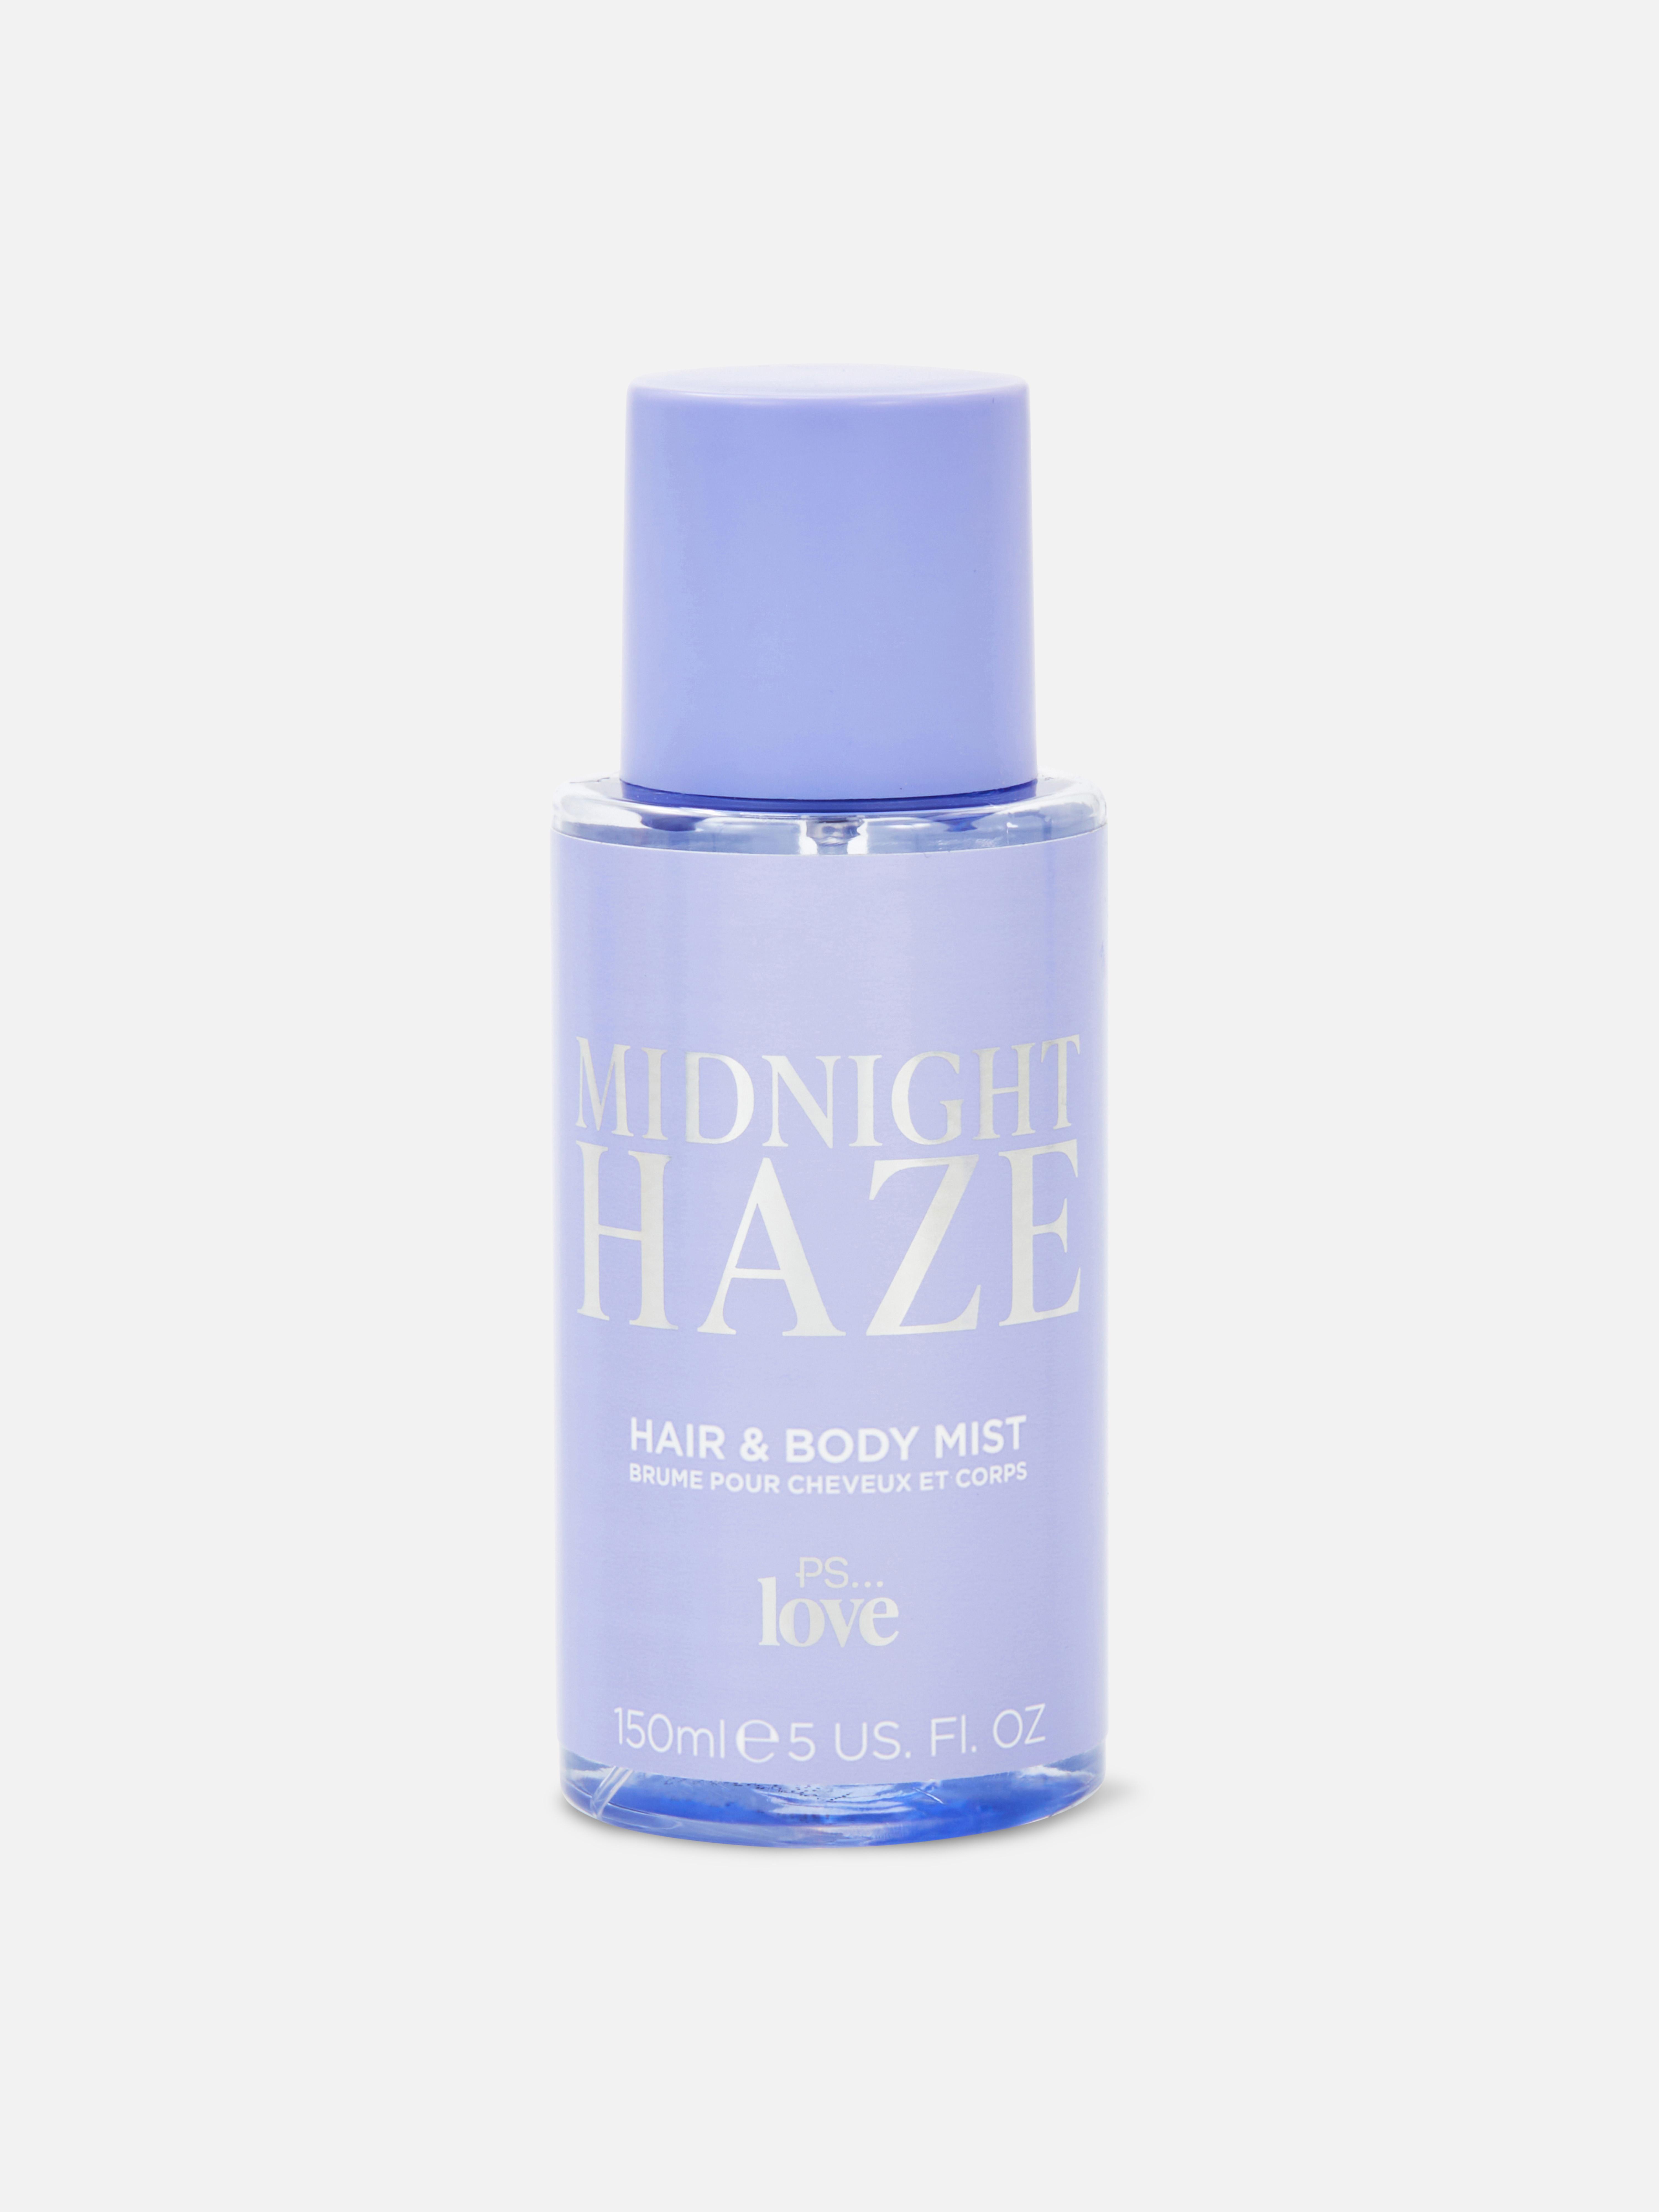 PS… Love Hair and Body Mist Lavender